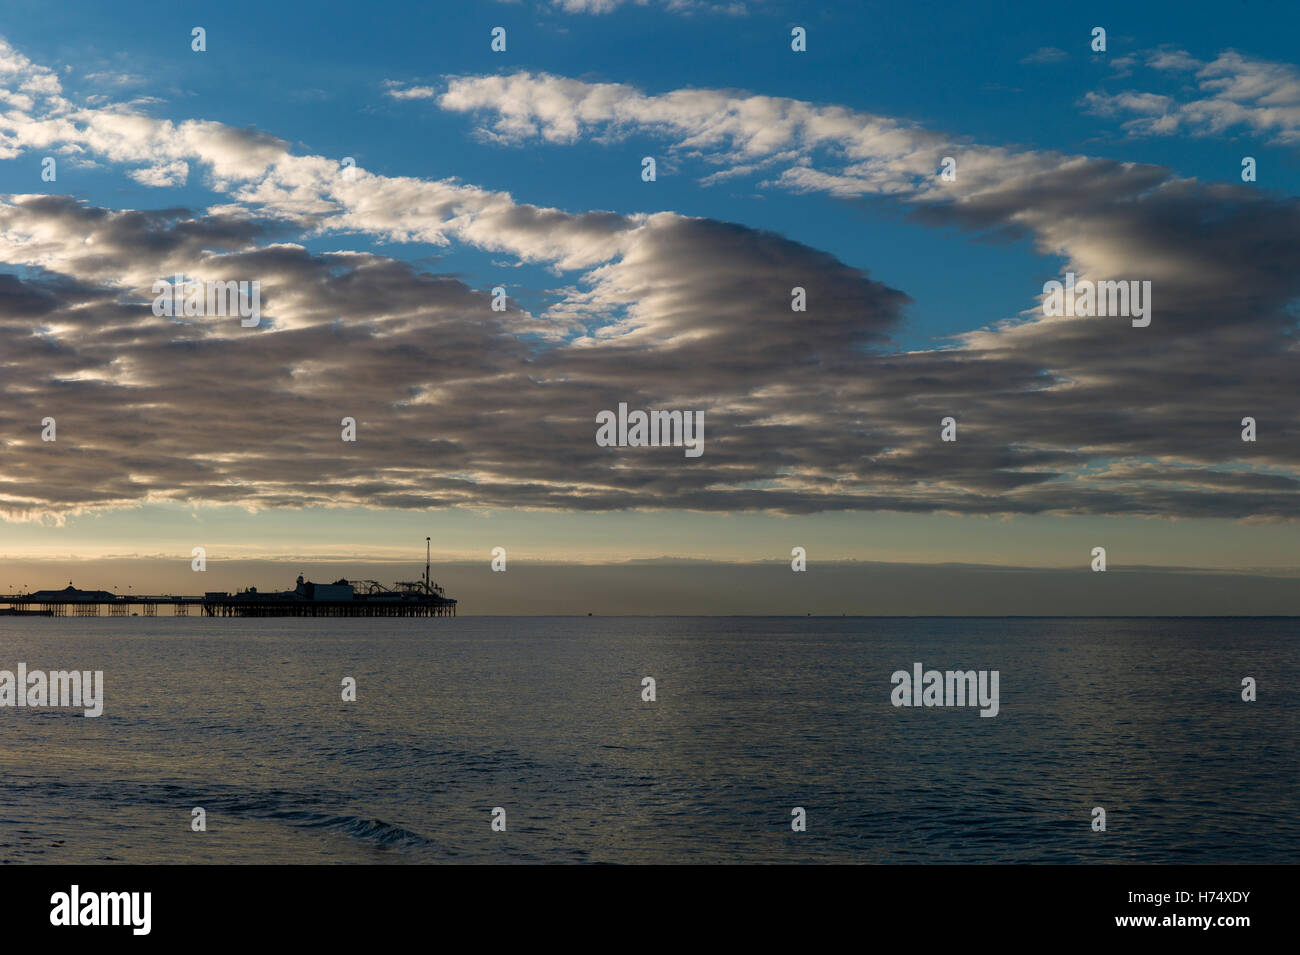 Unusual curled cloud formation over silhouette of Brighton pier Stock Photo